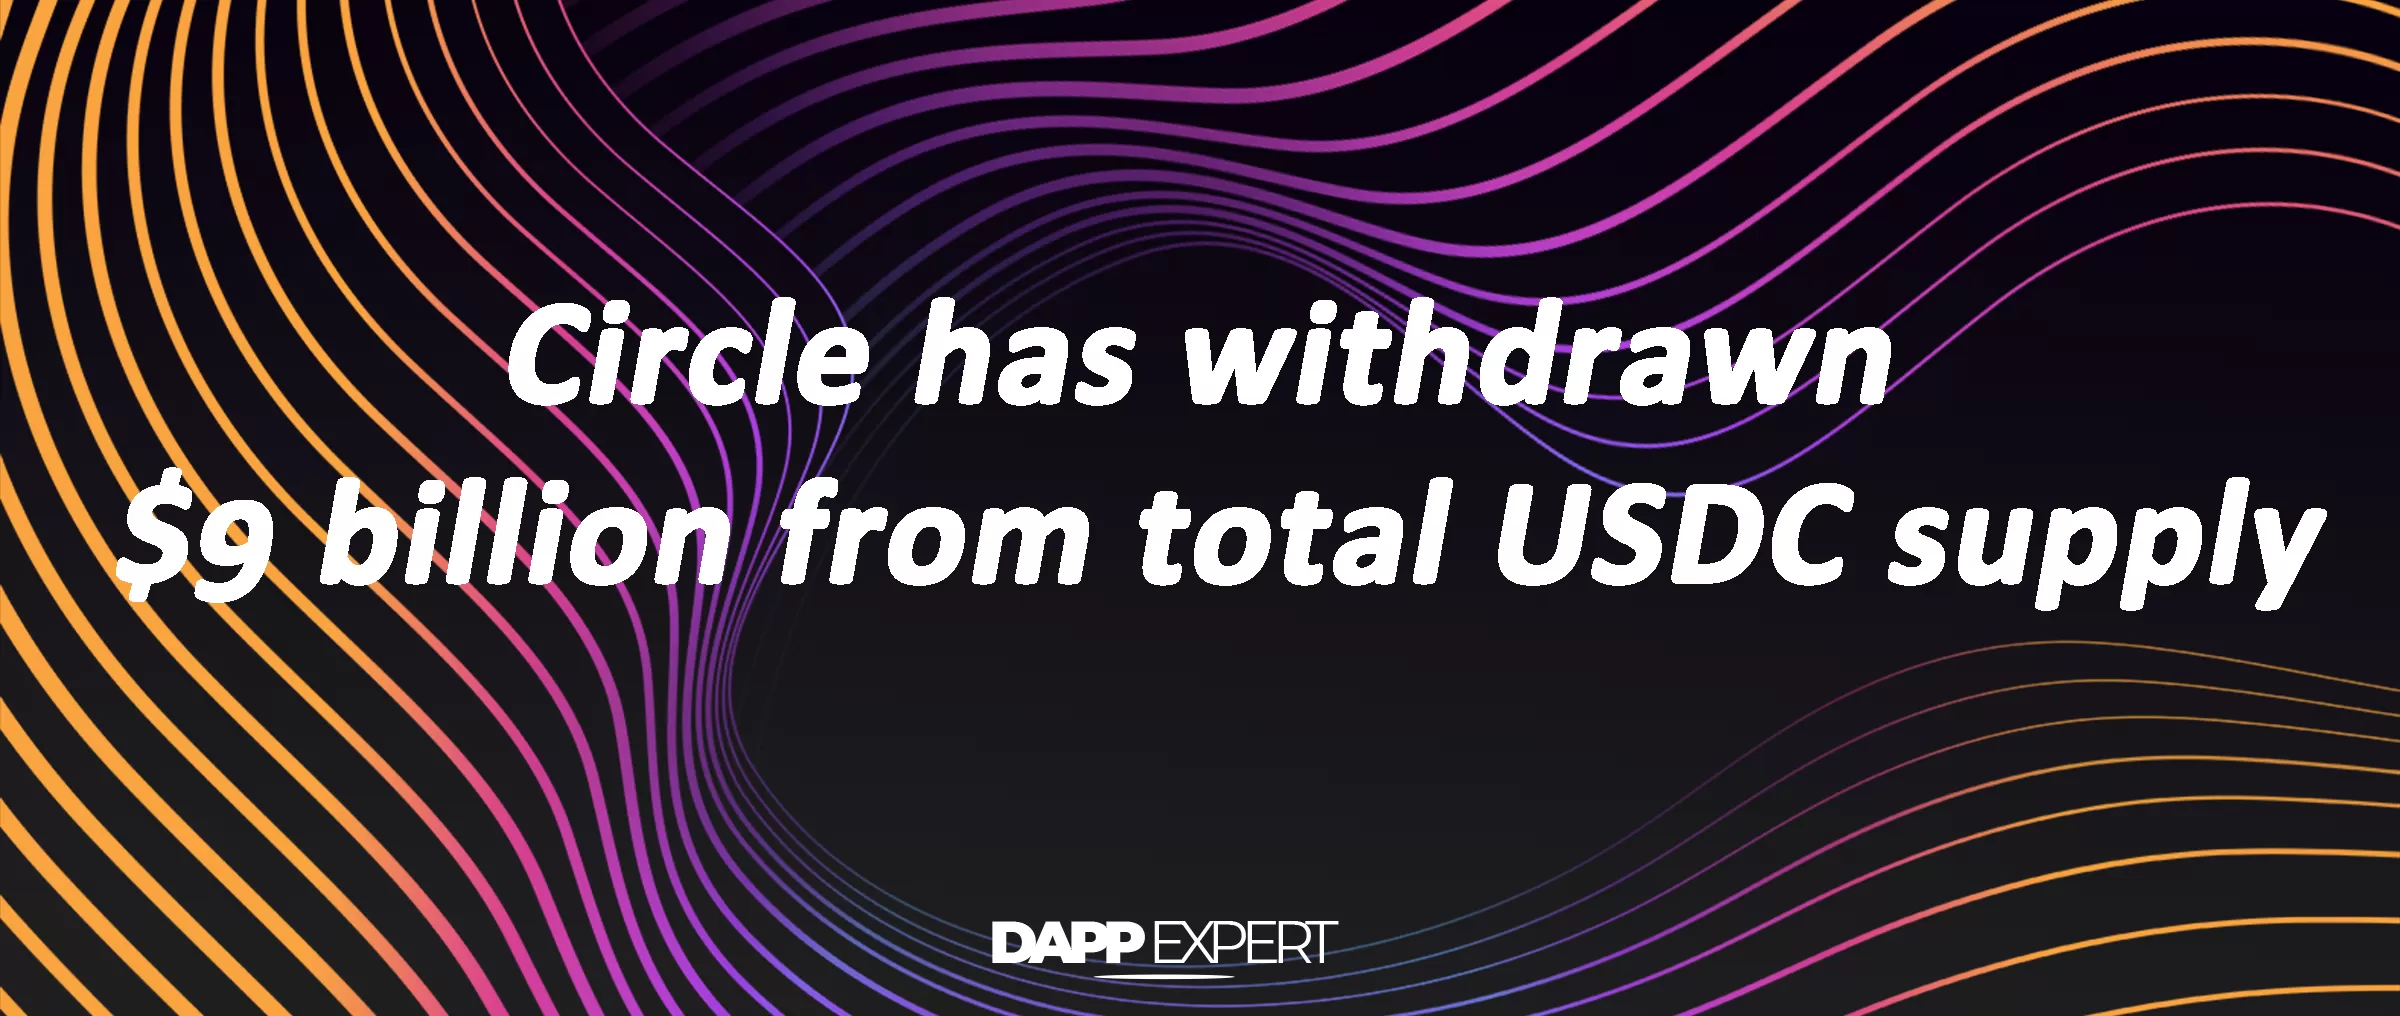 Circle has withdrawn $9 billion from total USDC supply